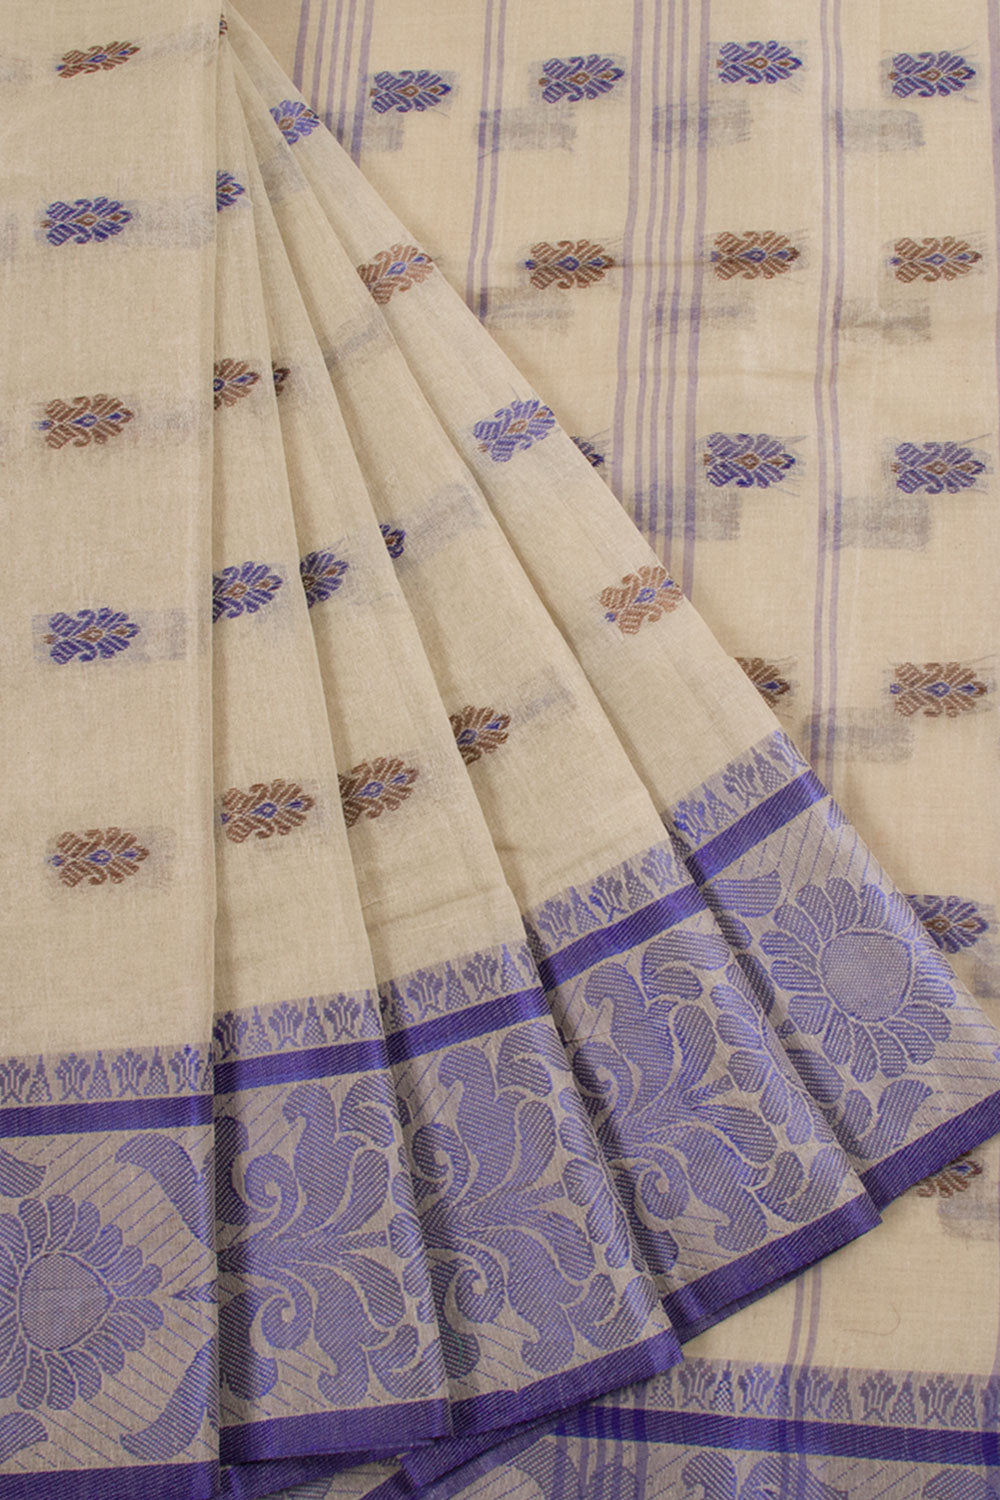 Handloom Tant Cotton Saree with Floral Motifs and Floral Border